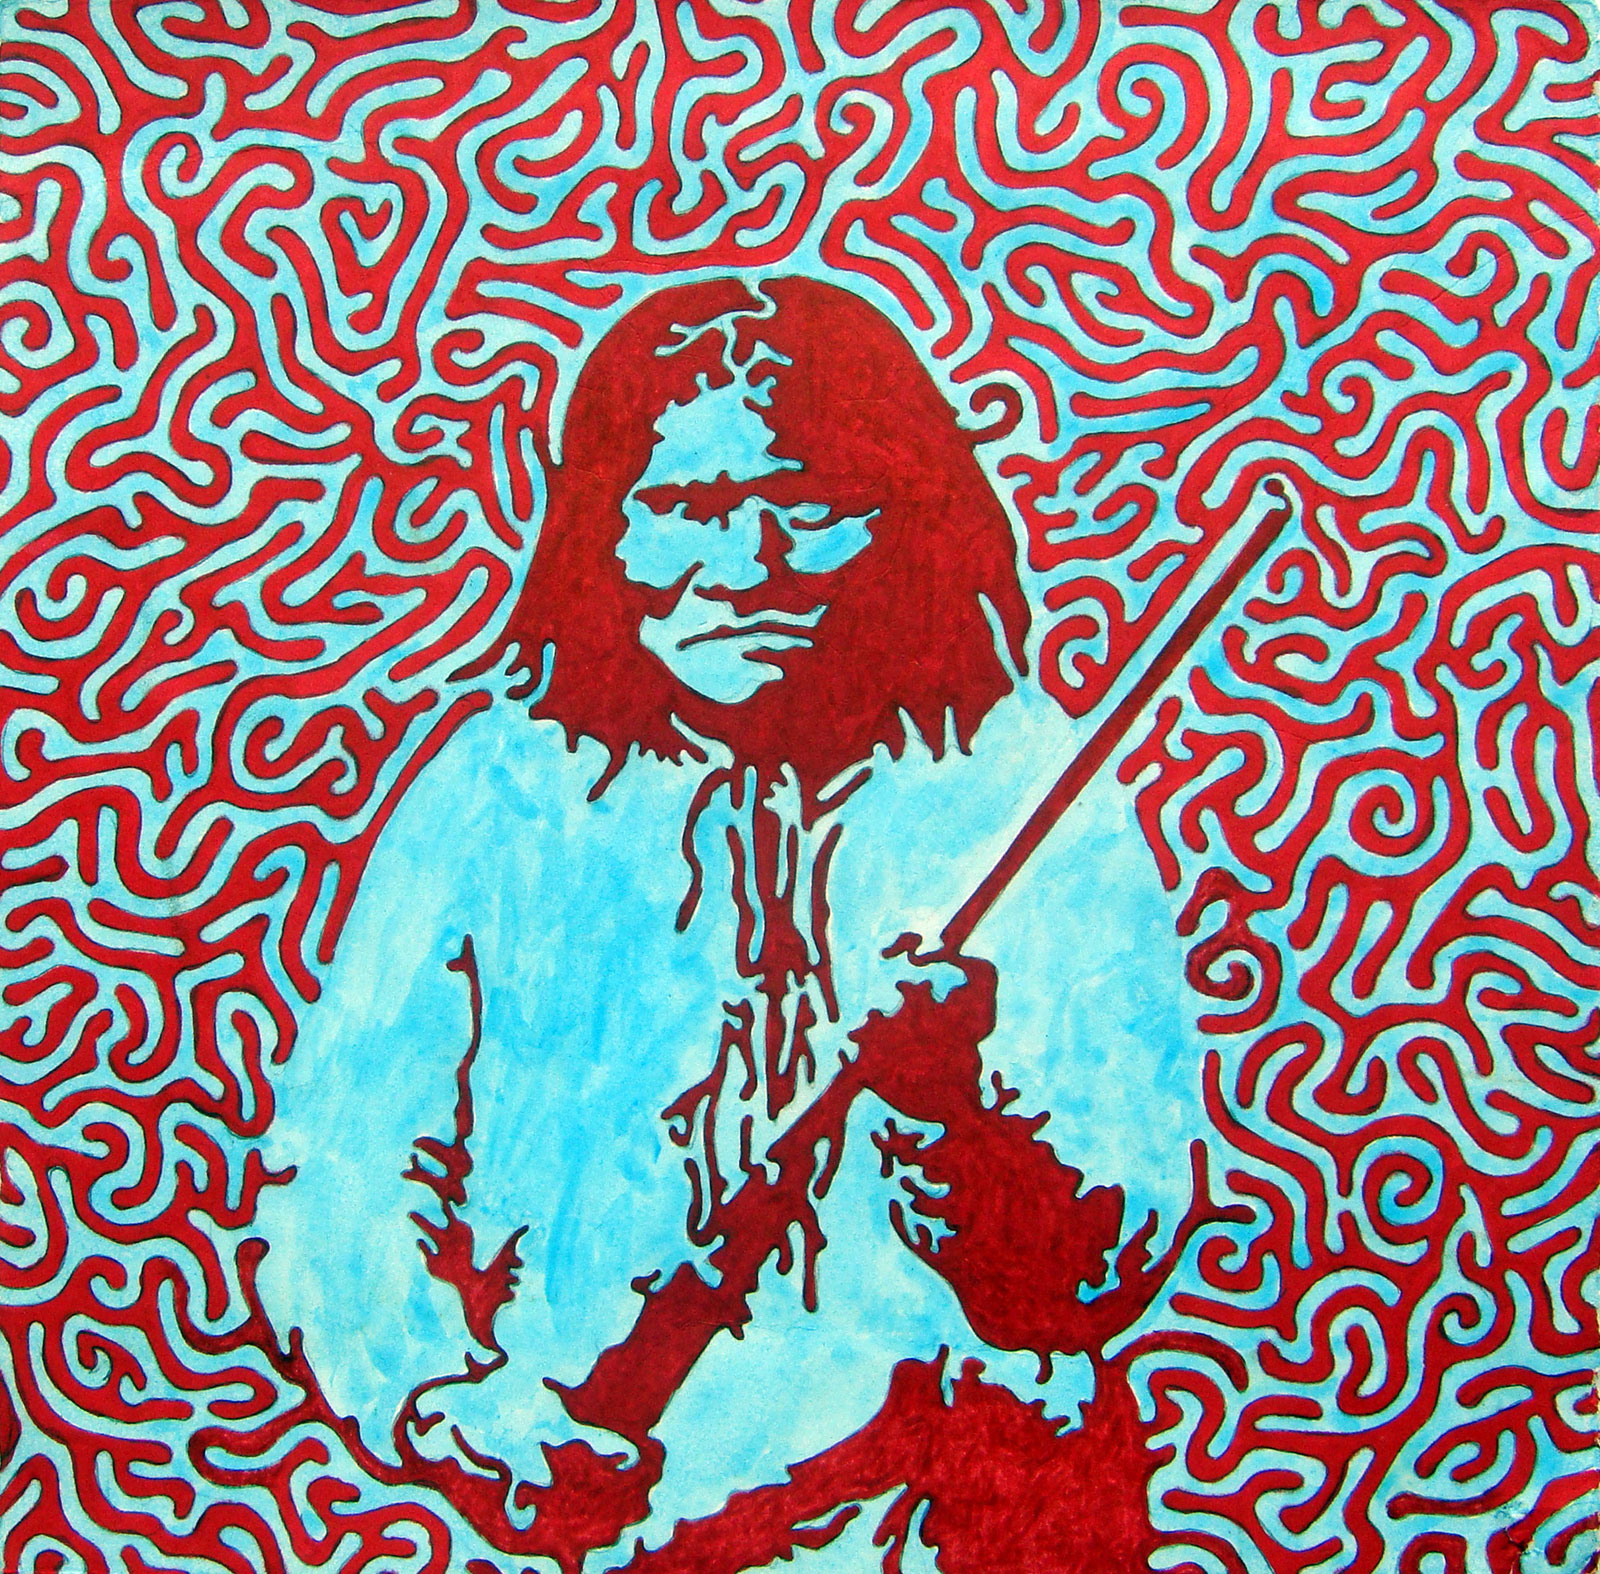  Geronimo  Sharpie and watercolor on paper  11" x 11"  AVAILABLE  $275 